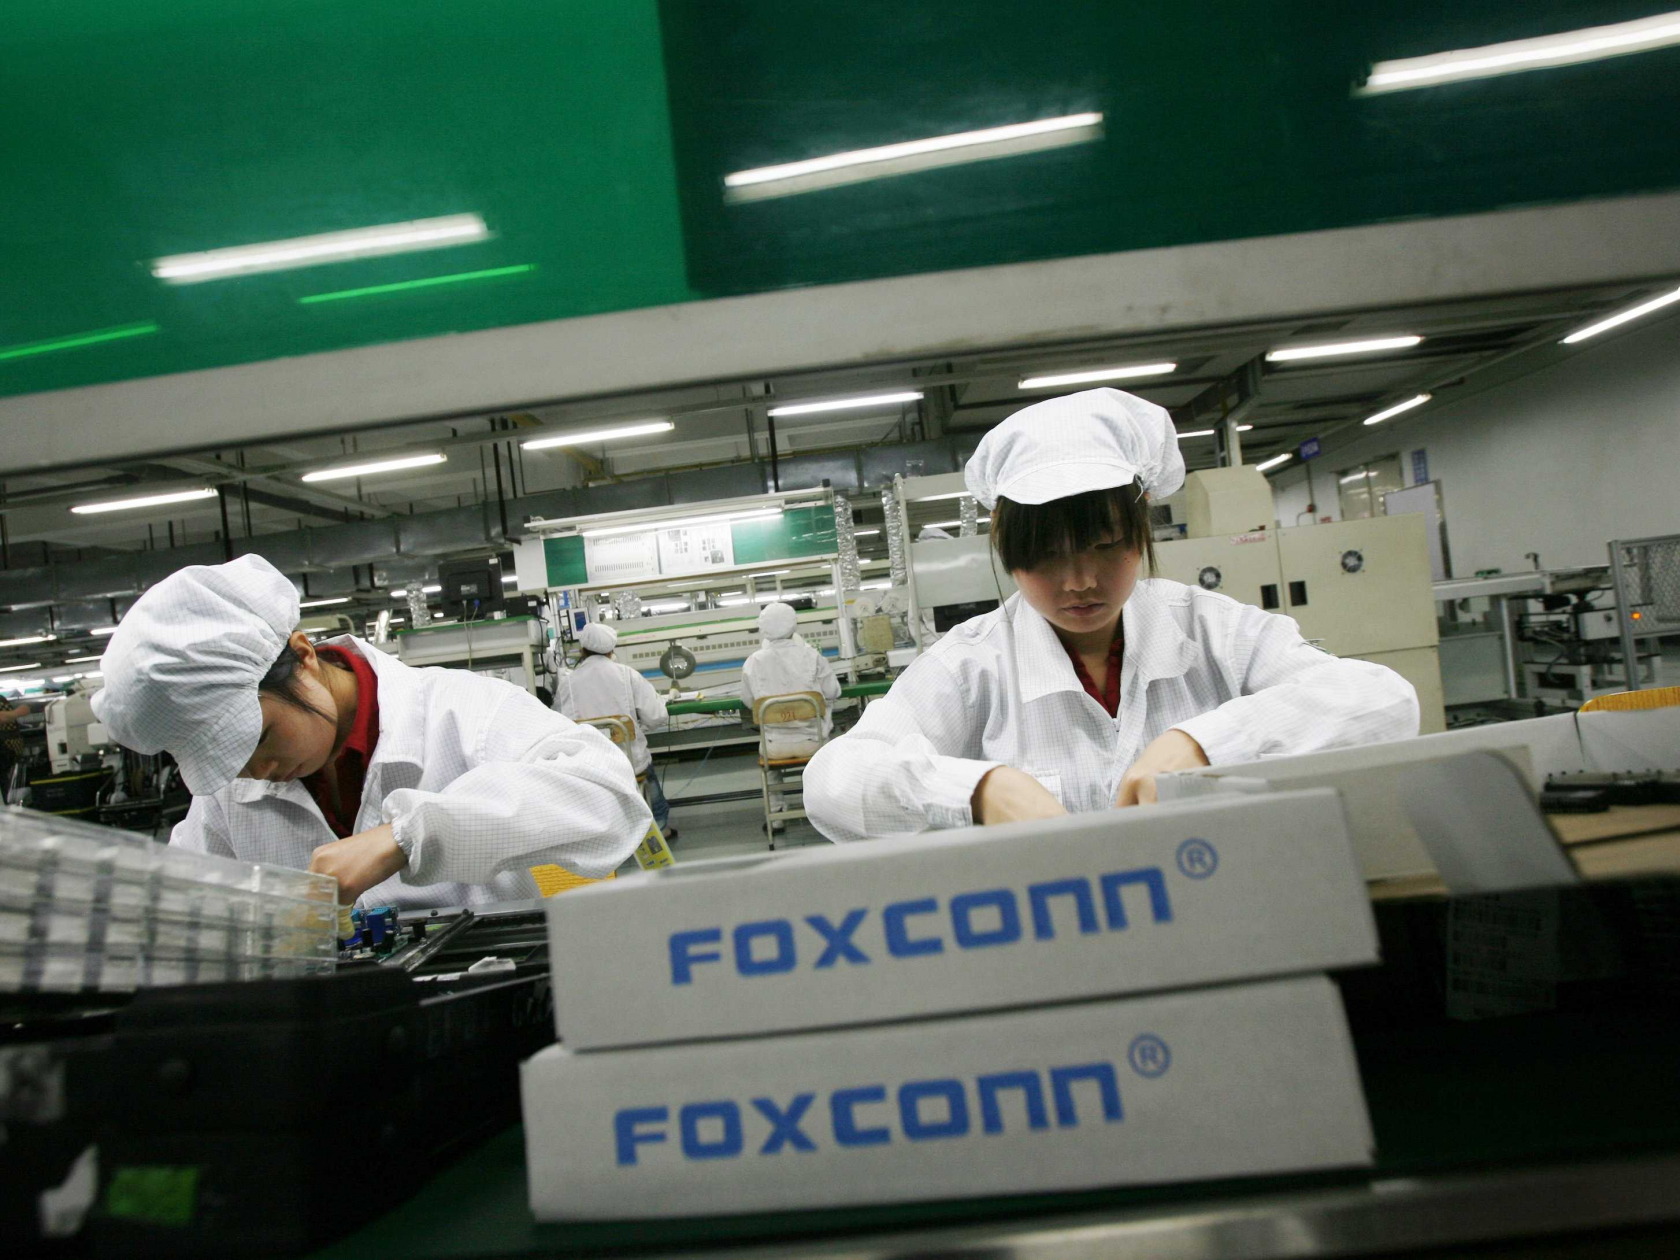 Foxconn denies claims that eight workers have died from Covid-19 at its locked-down China plant